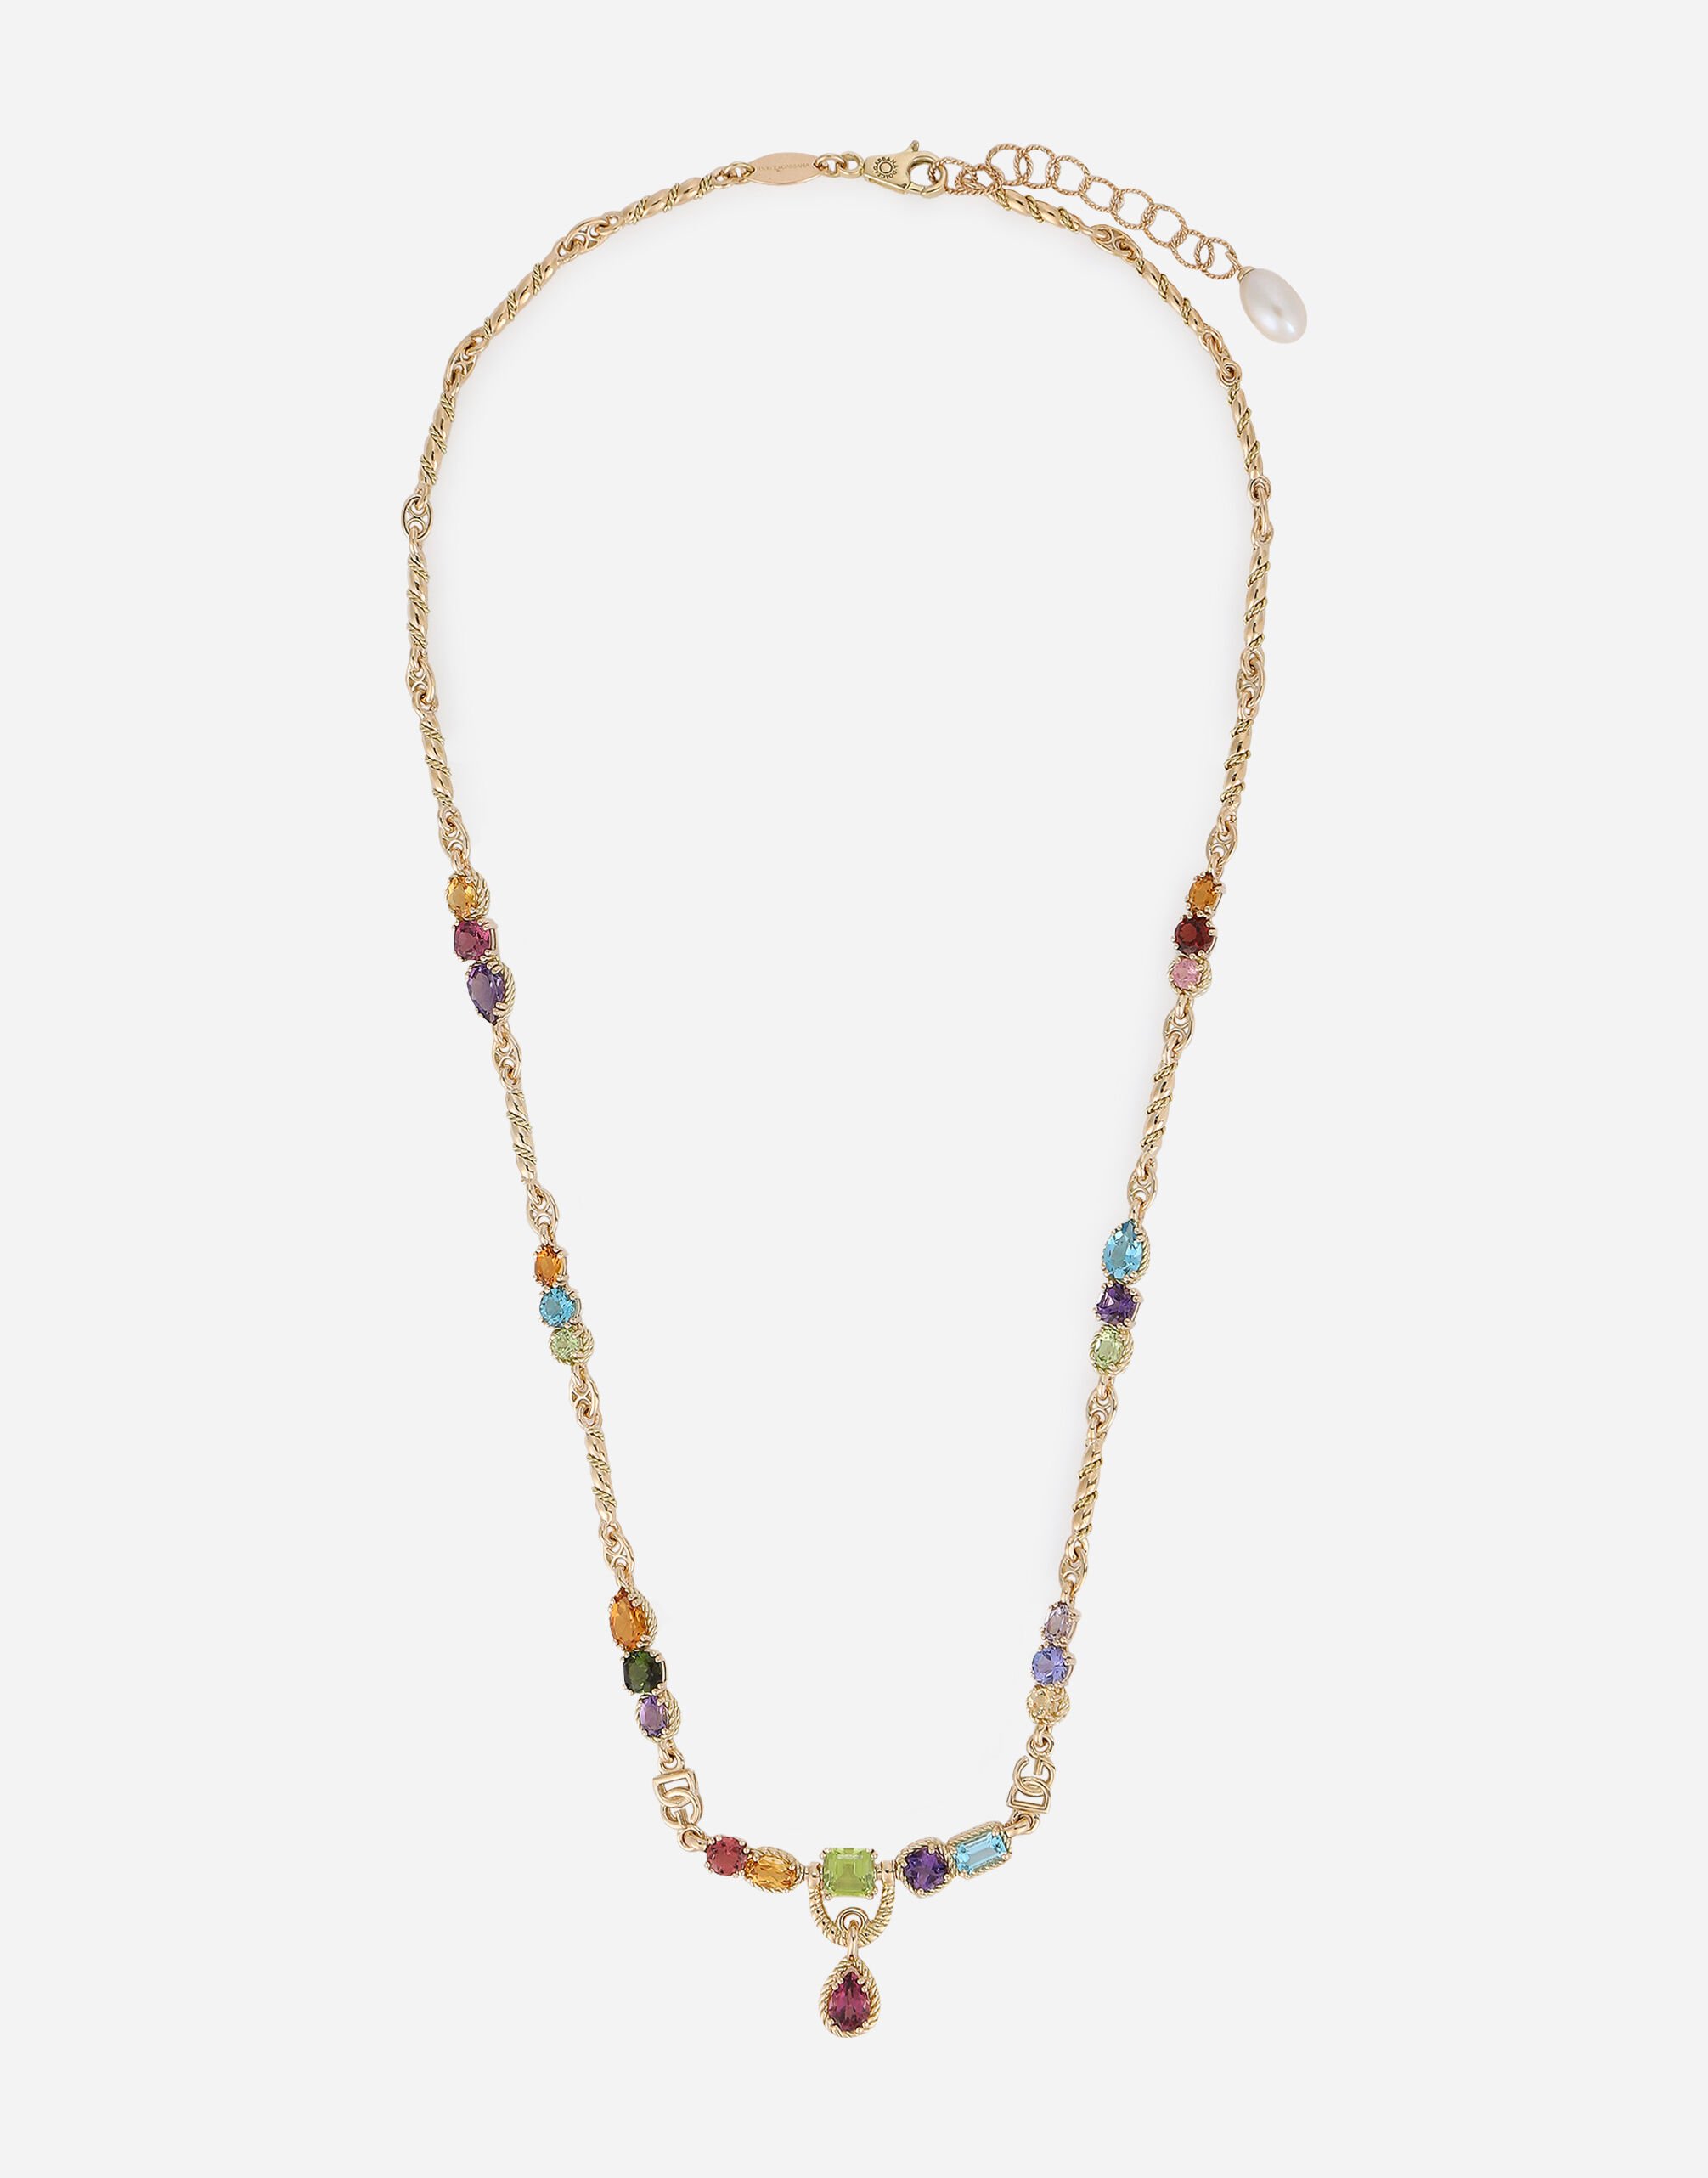 Dolce & Gabbana 18kt yellow gold necklace with multicolored fine gemstones Gold WAMR1GWMIX1